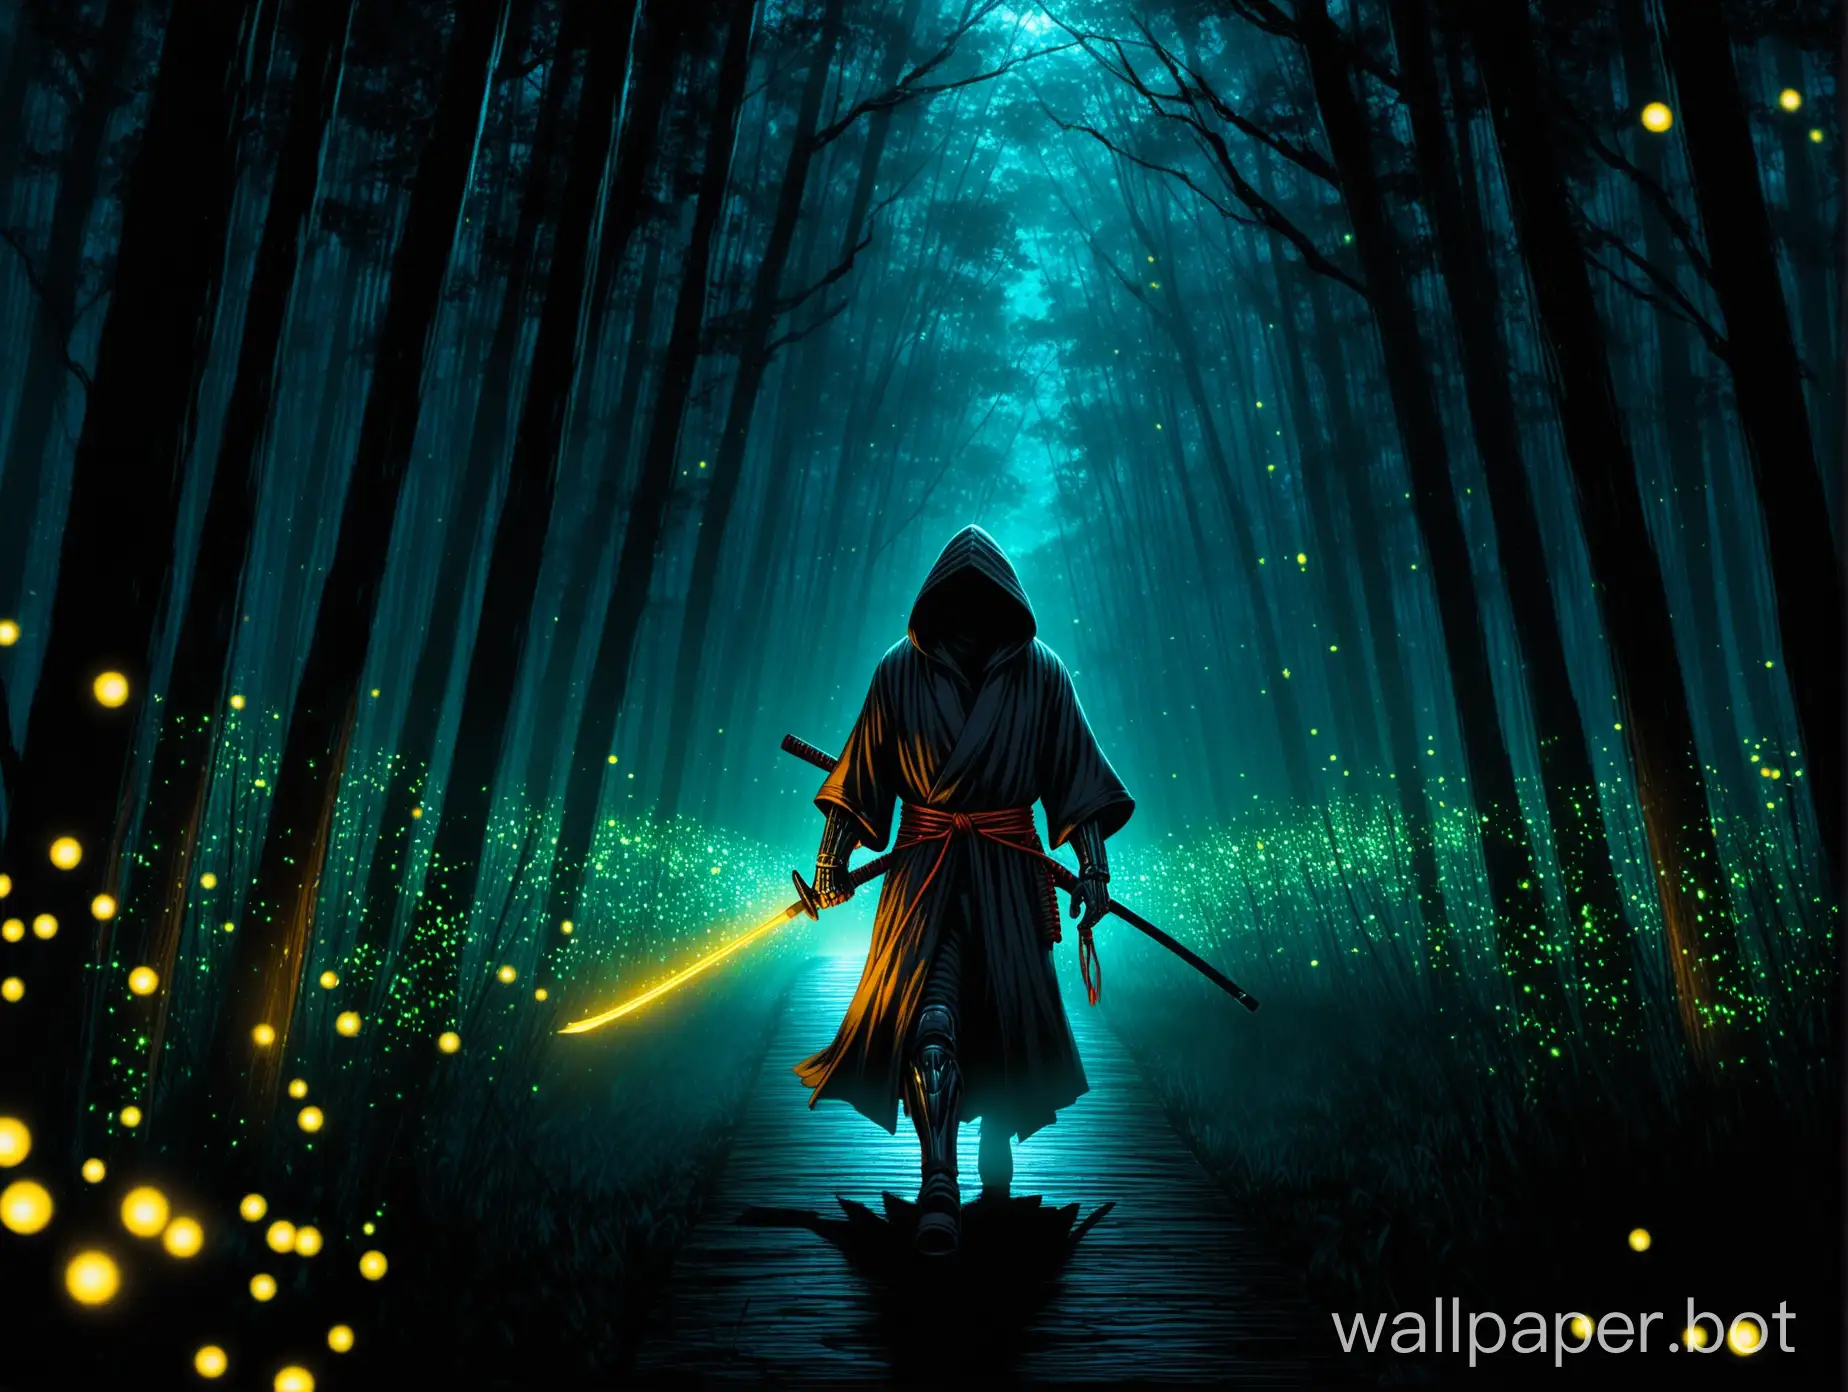 a 3D image of a hooded hero wanders the dark forest. Cloaked in a ronin style robe with intricate detail.  fireflies lighting his way down a long, dark path. Searching  for a monster with his glowing eyes through a pitch black hood. The arm he lost in battle, now a bionic one,  grasping his weapon